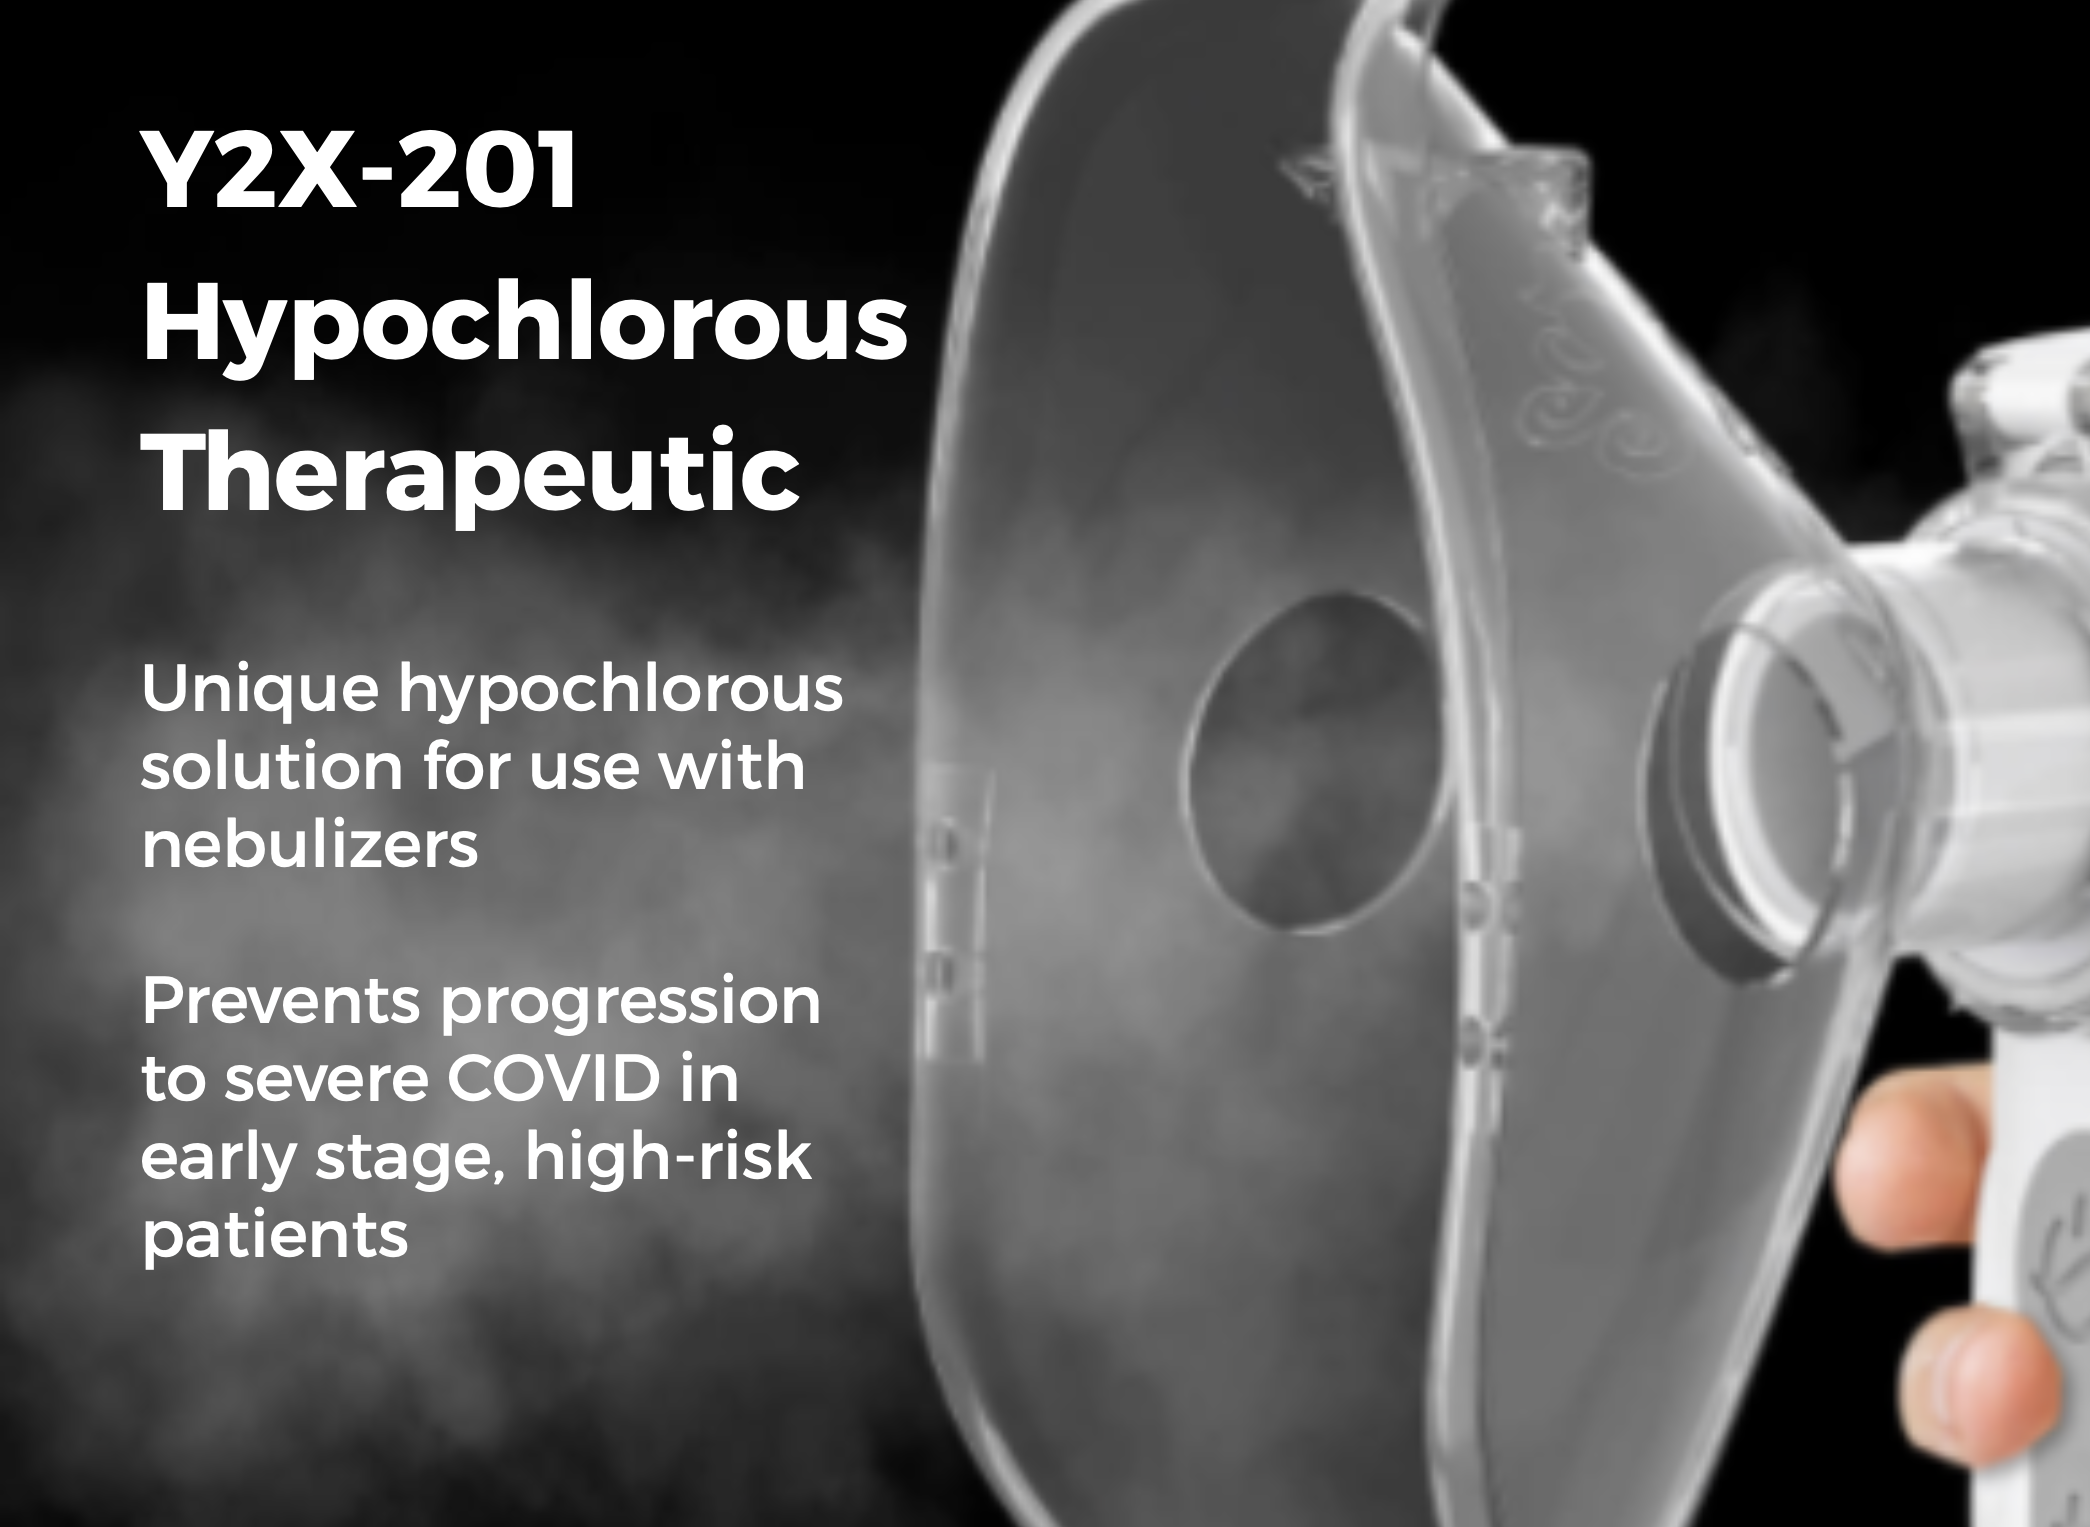 Y2X-201 Hypochlorous Therapeutic solution for the prevention of severe covid